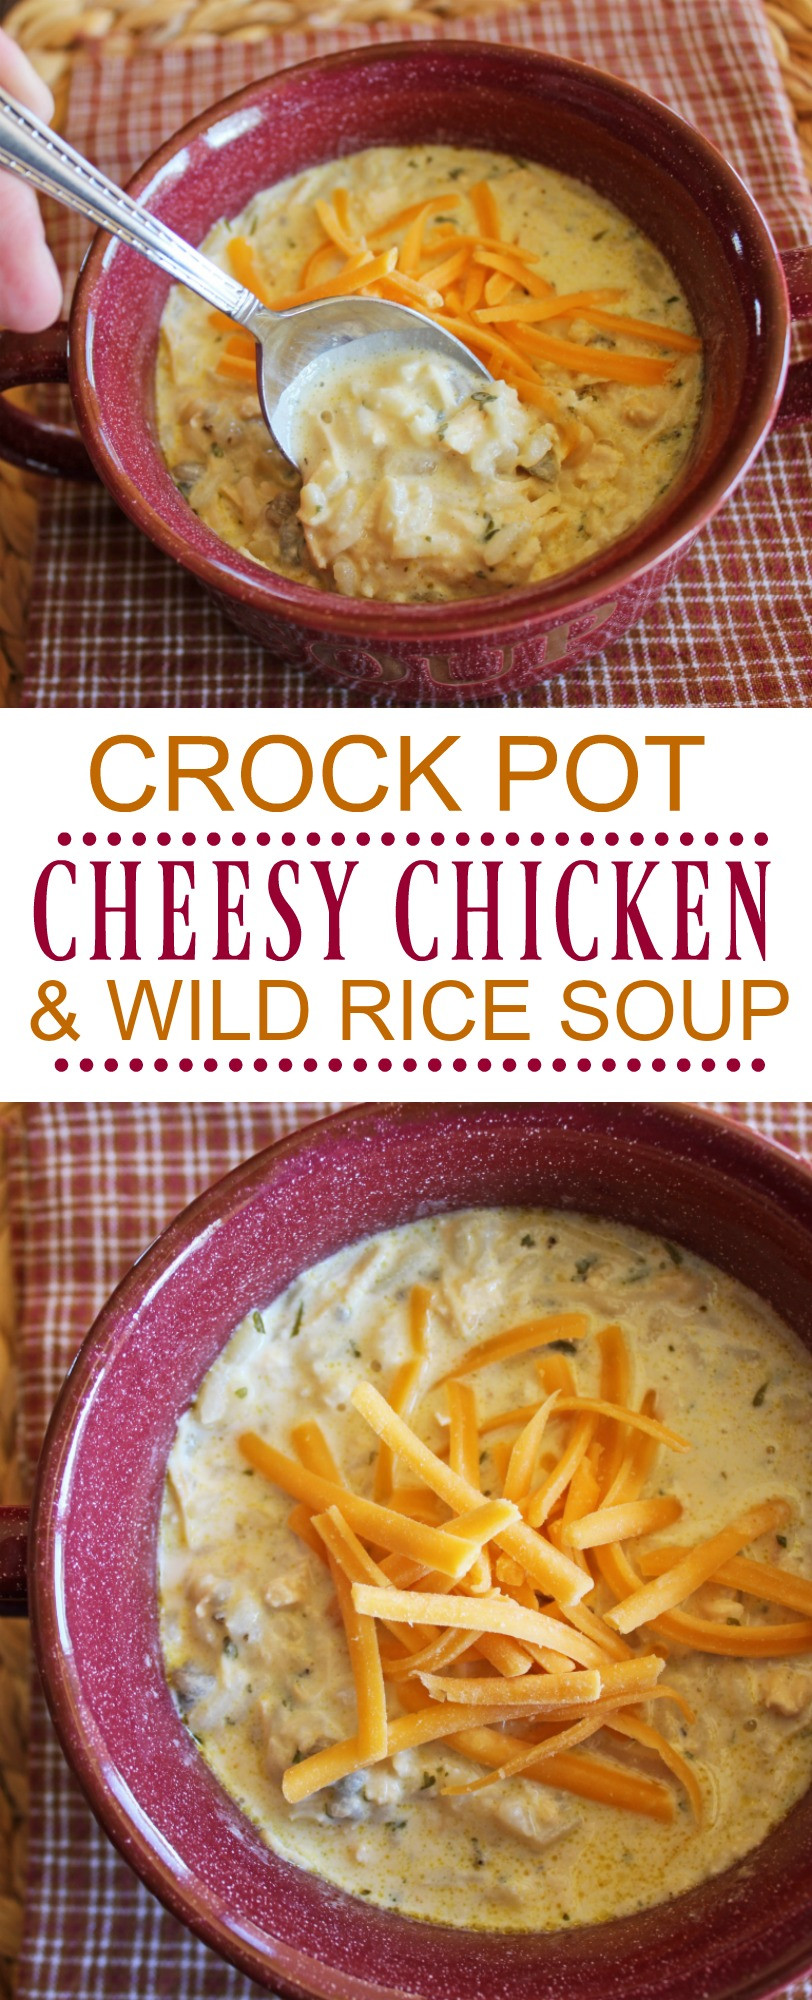 Chicken And Wild Rice Soup Crock Pot
 Cheesy Chicken and Wild Rice Soup Crock Pot